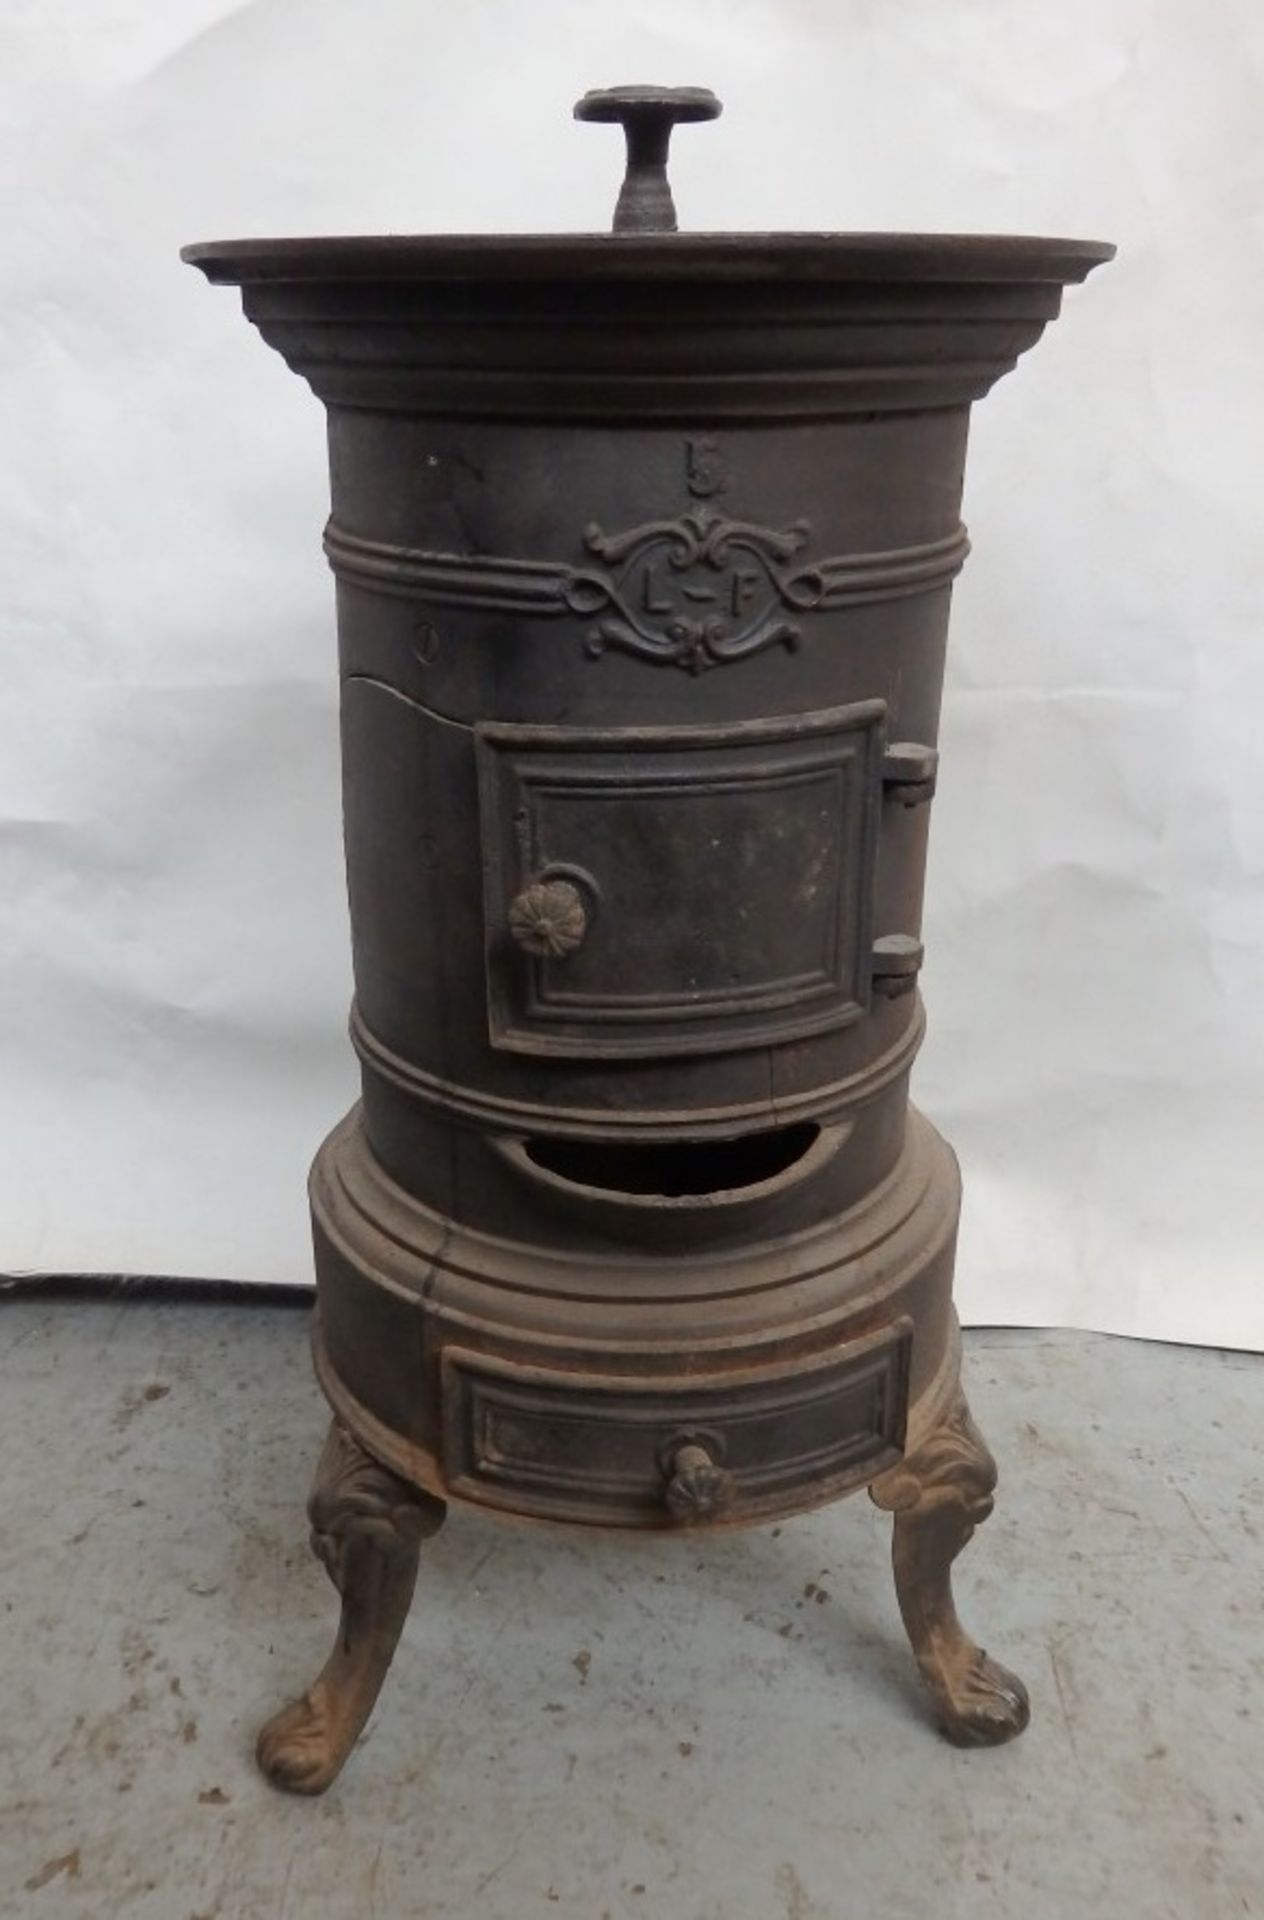 1 x Reclaimed Antique Cast Iron Potbelly Wood Burner / Stove - Dimensions: H61, Diameter 30cm - - Image 6 of 9